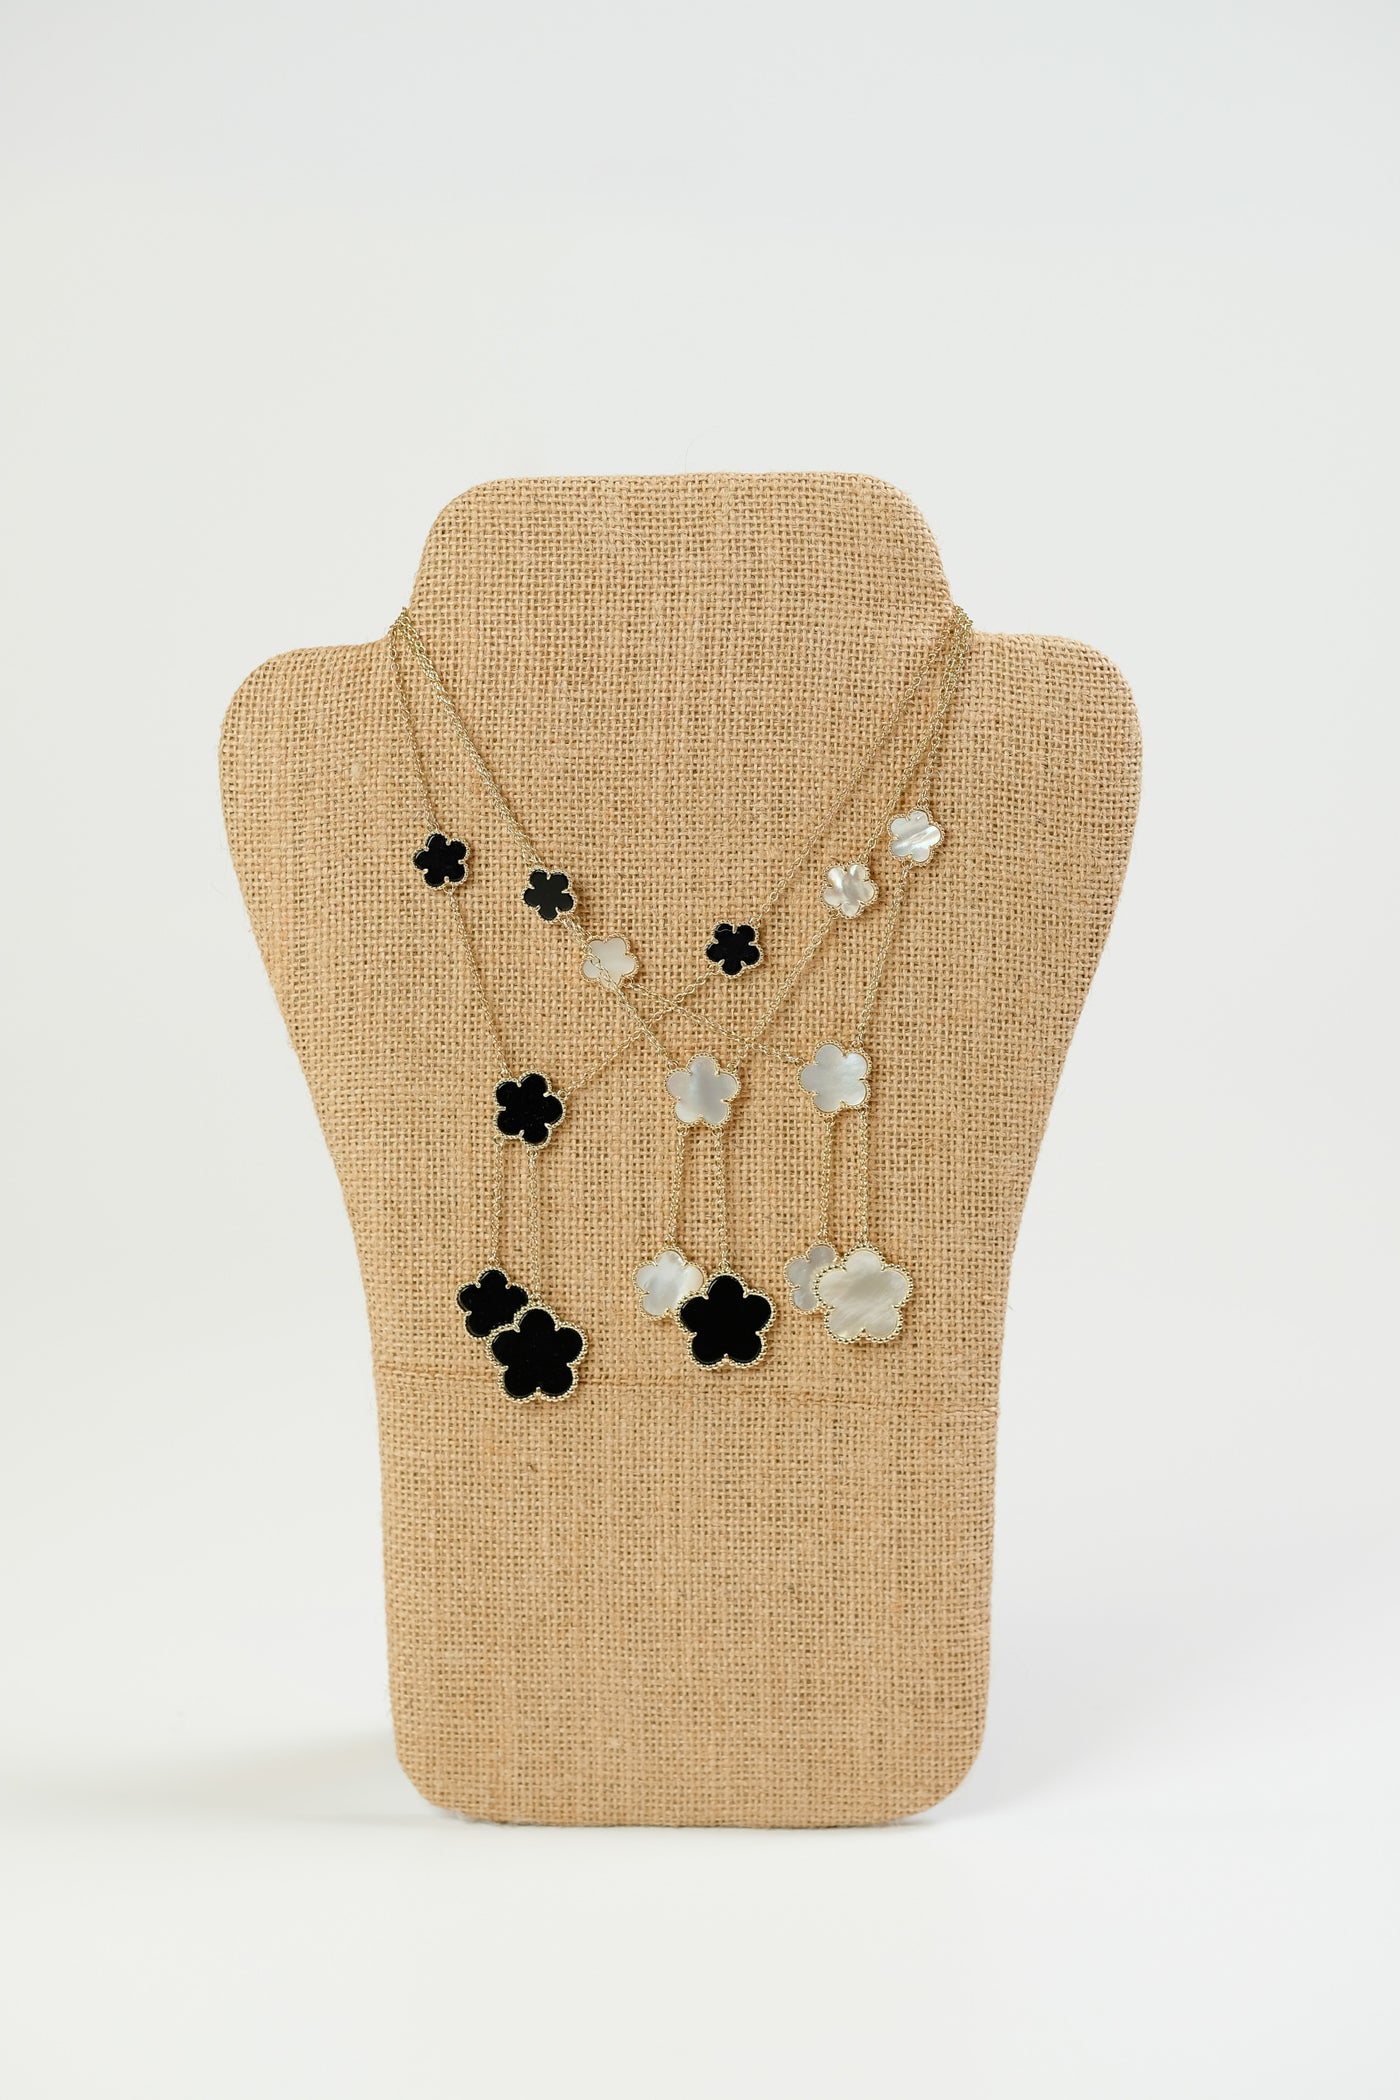 Designer inspired 3 Tiered Necklaces - SOLD OUT!